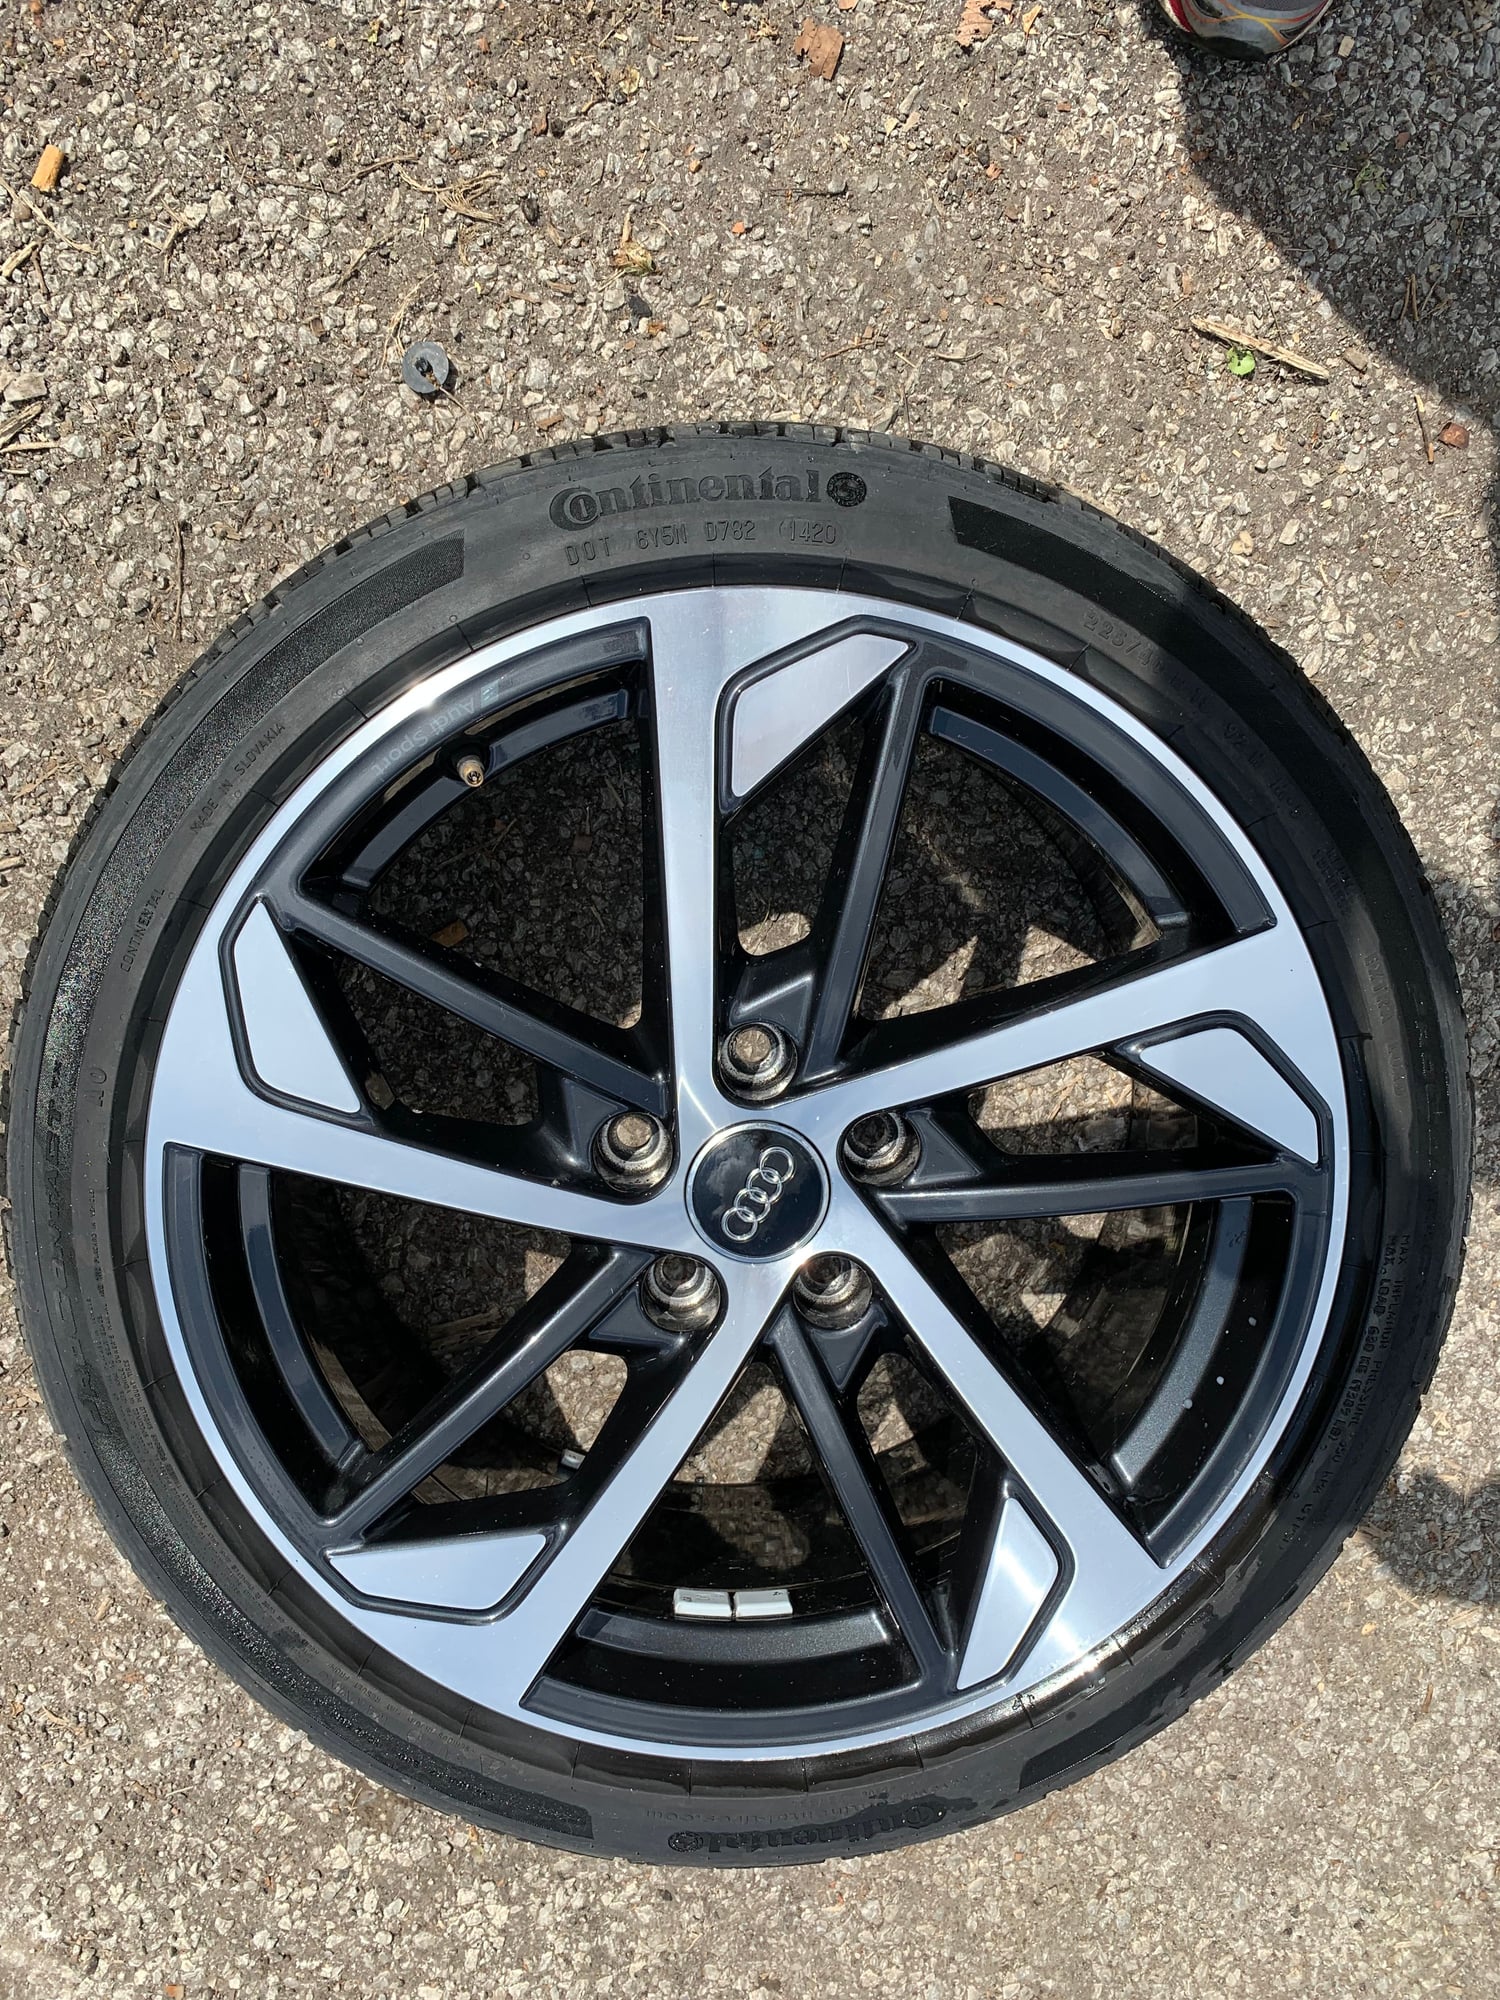 Wheels and Tires/Axles - 18x8 A3 wheels and tires - Used - 2020 to 2021 Audi A3 Quattro - Kansas City, MO 64106, United States